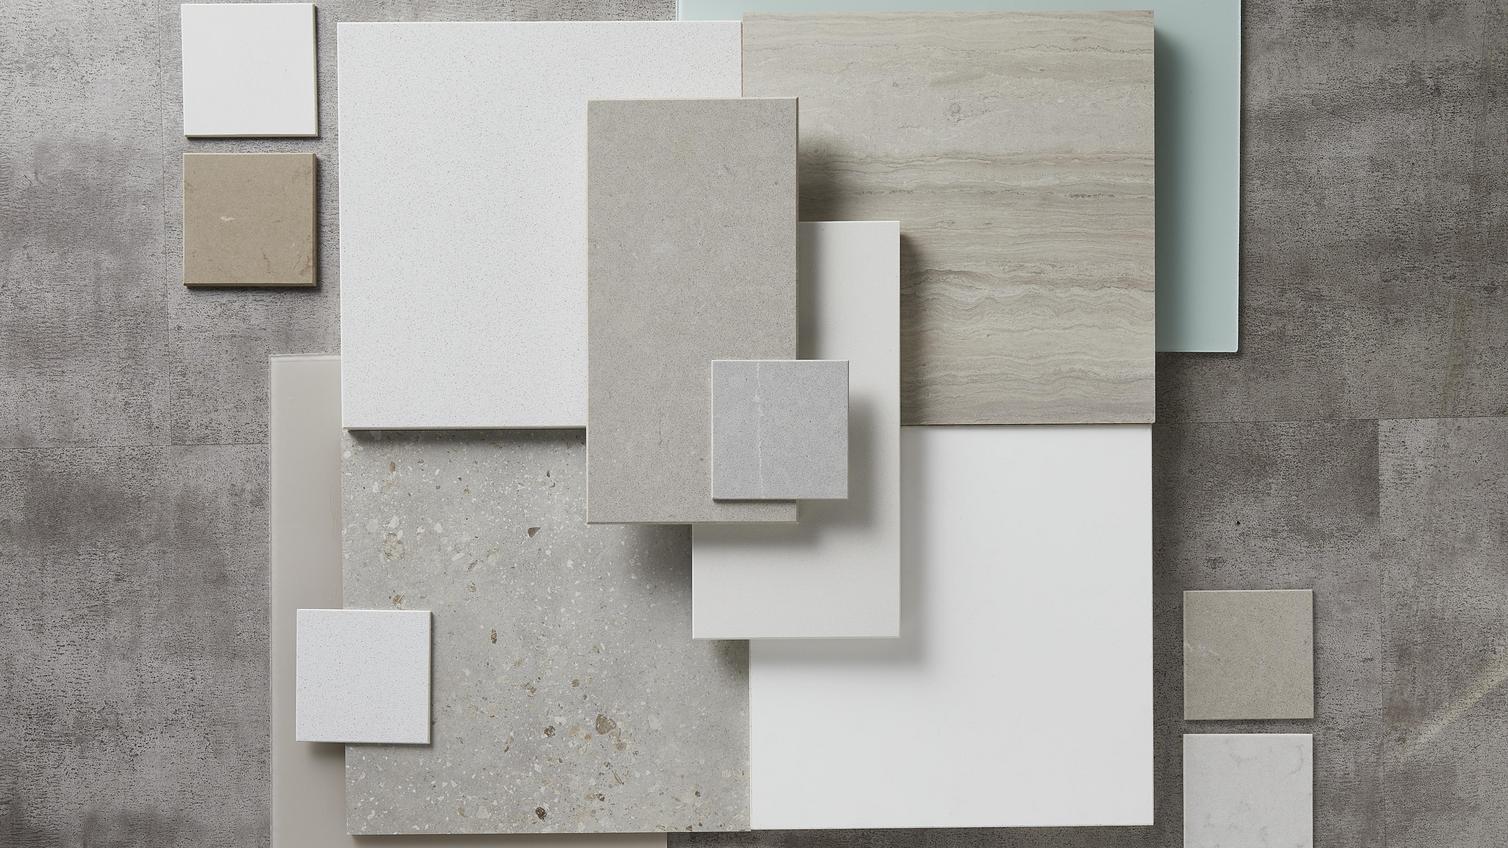 Calm haven flat lay showing light grey oak flooring, a sandstone door front,, light grey panels and textured stone slabs.